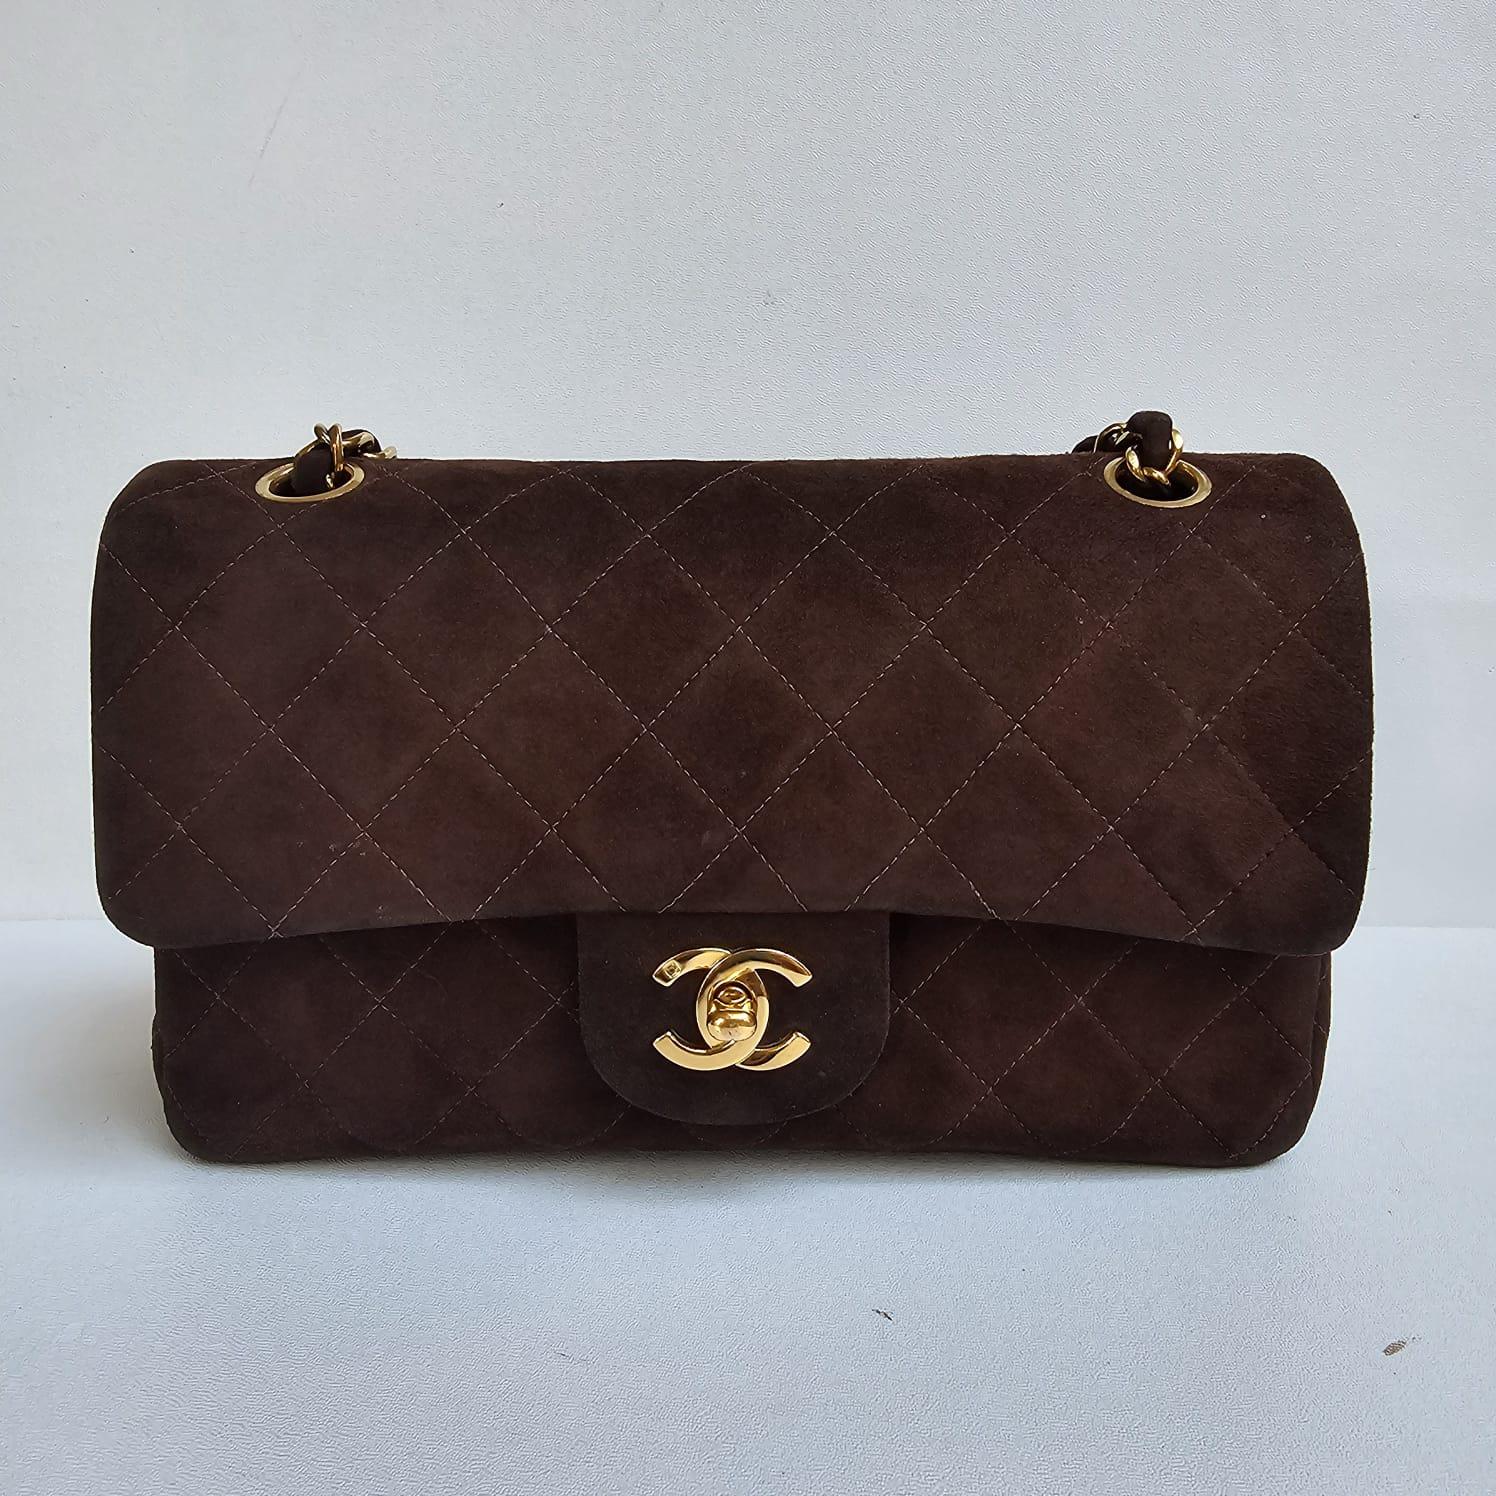 Vintage Chanel Dark Brown Suede Quilted Small Double Flap Bag In Good Condition For Sale In Jakarta, Daerah Khusus Ibukota Jakarta